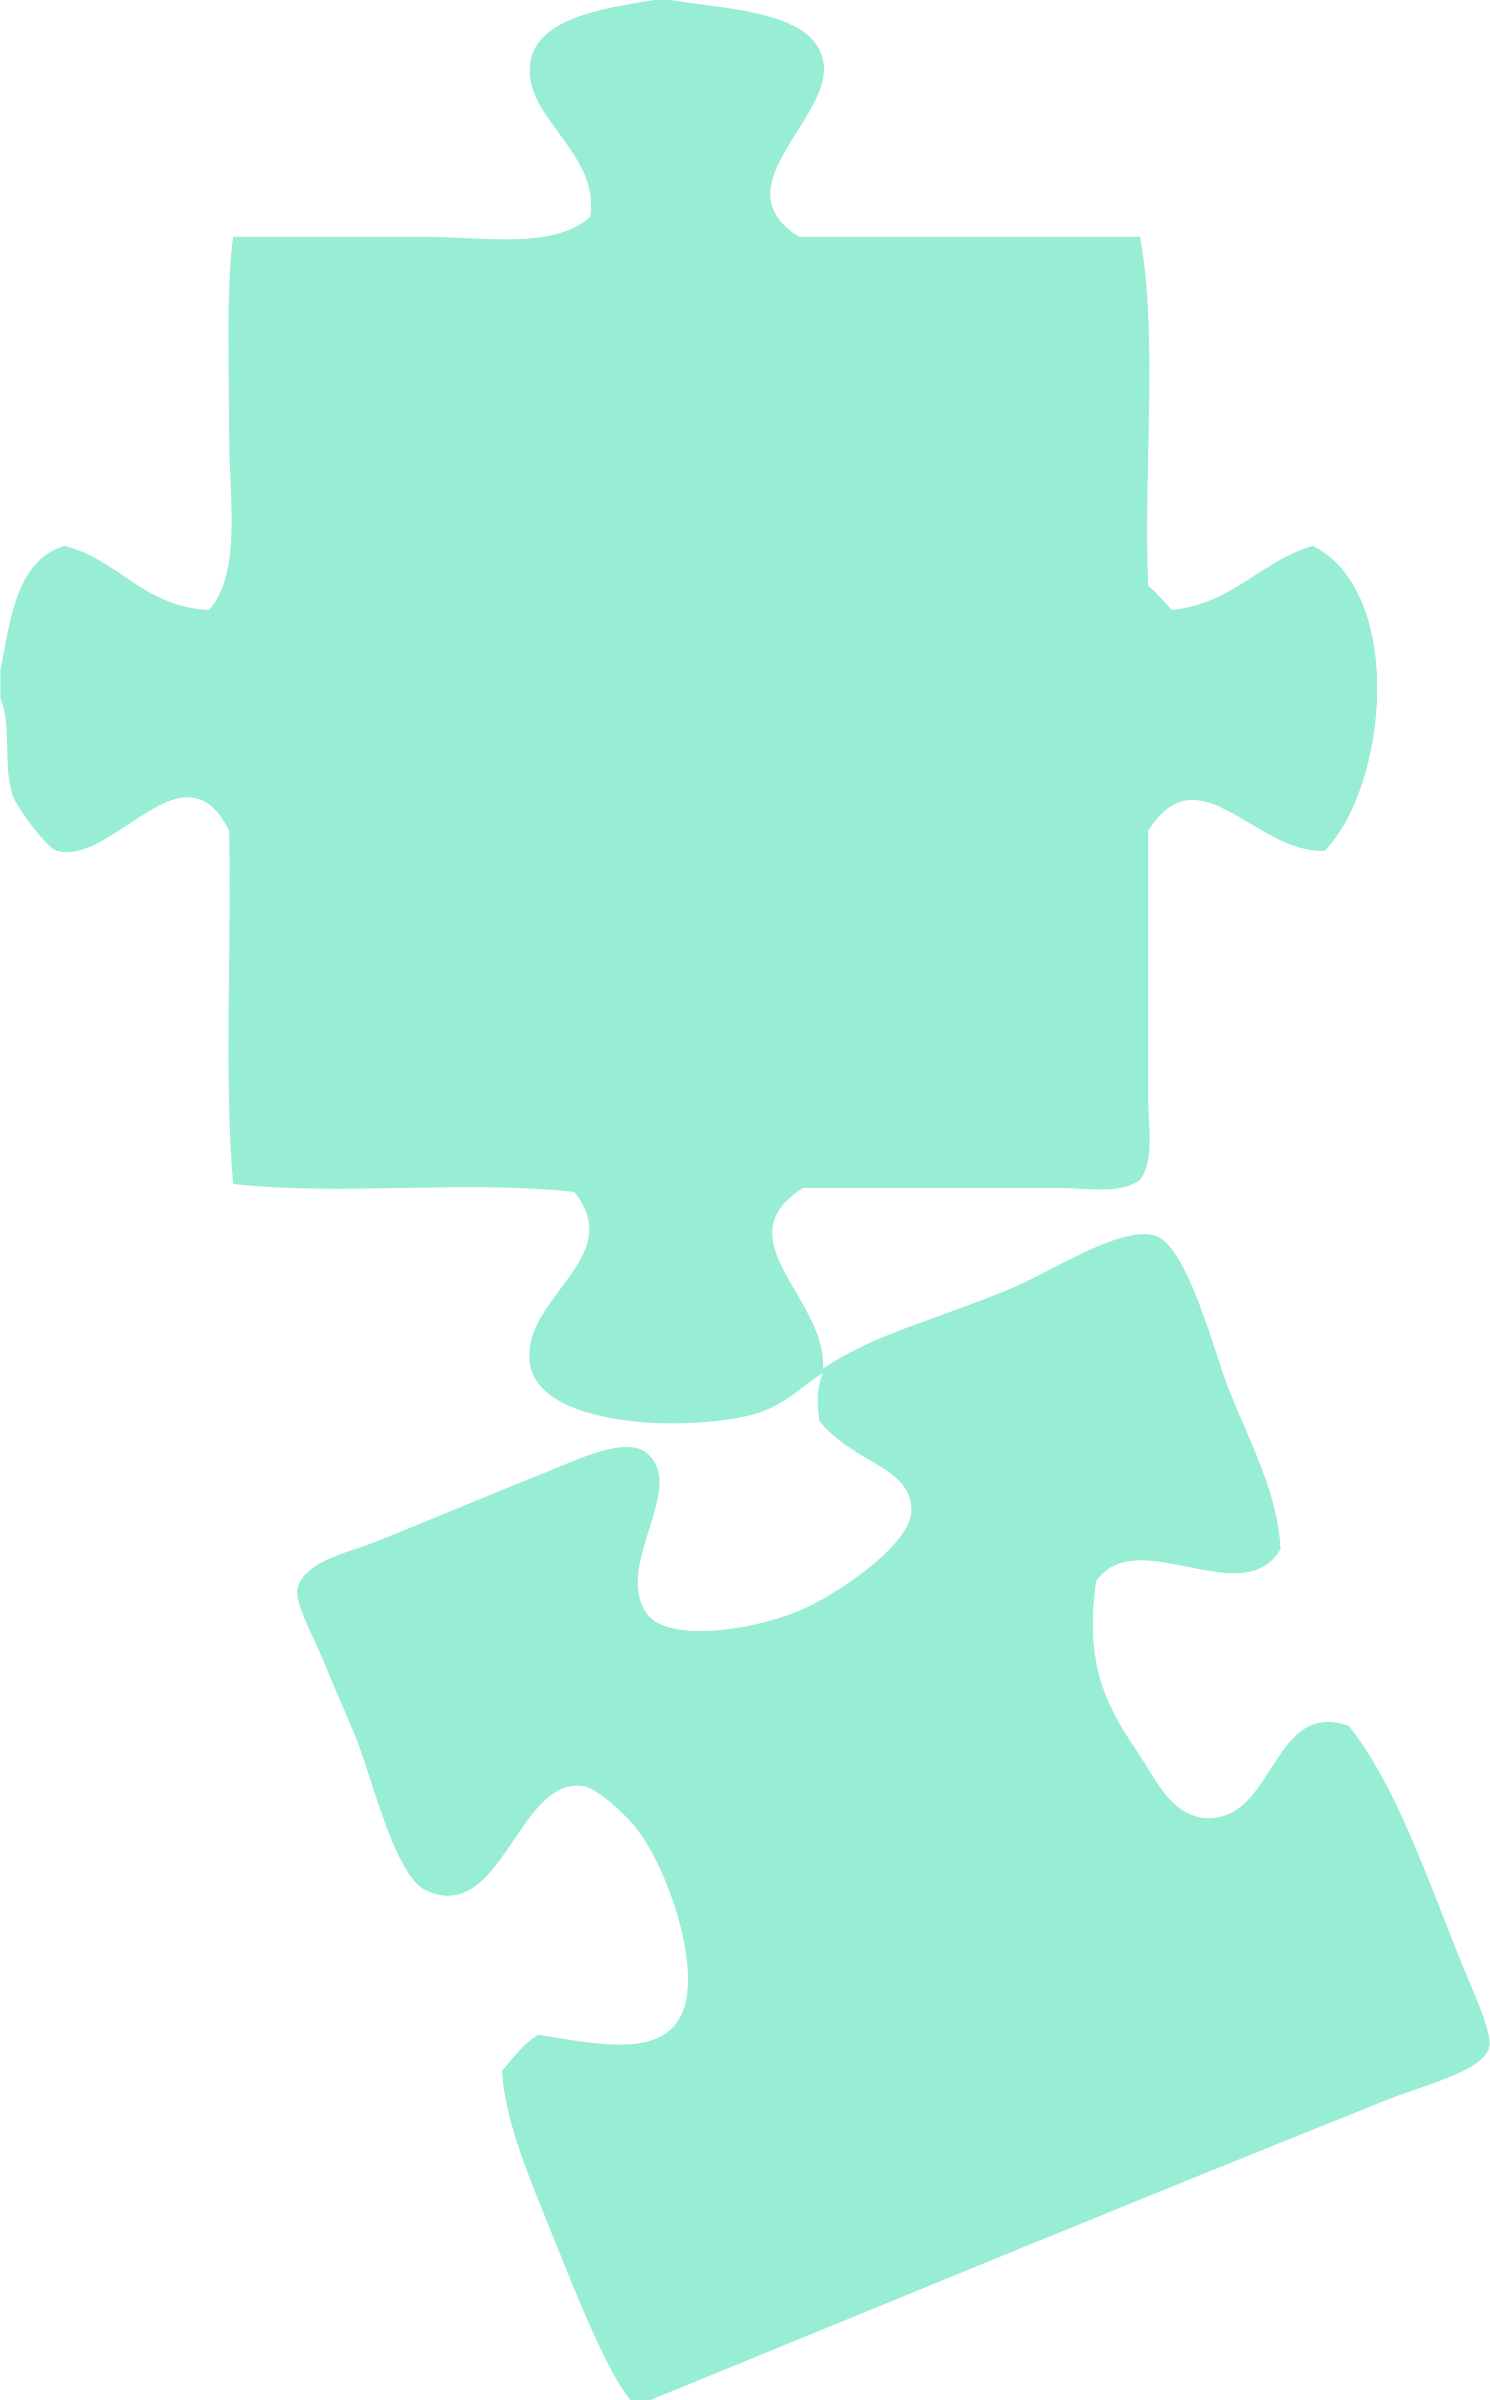 Puzzle clipart two piece. Big image png